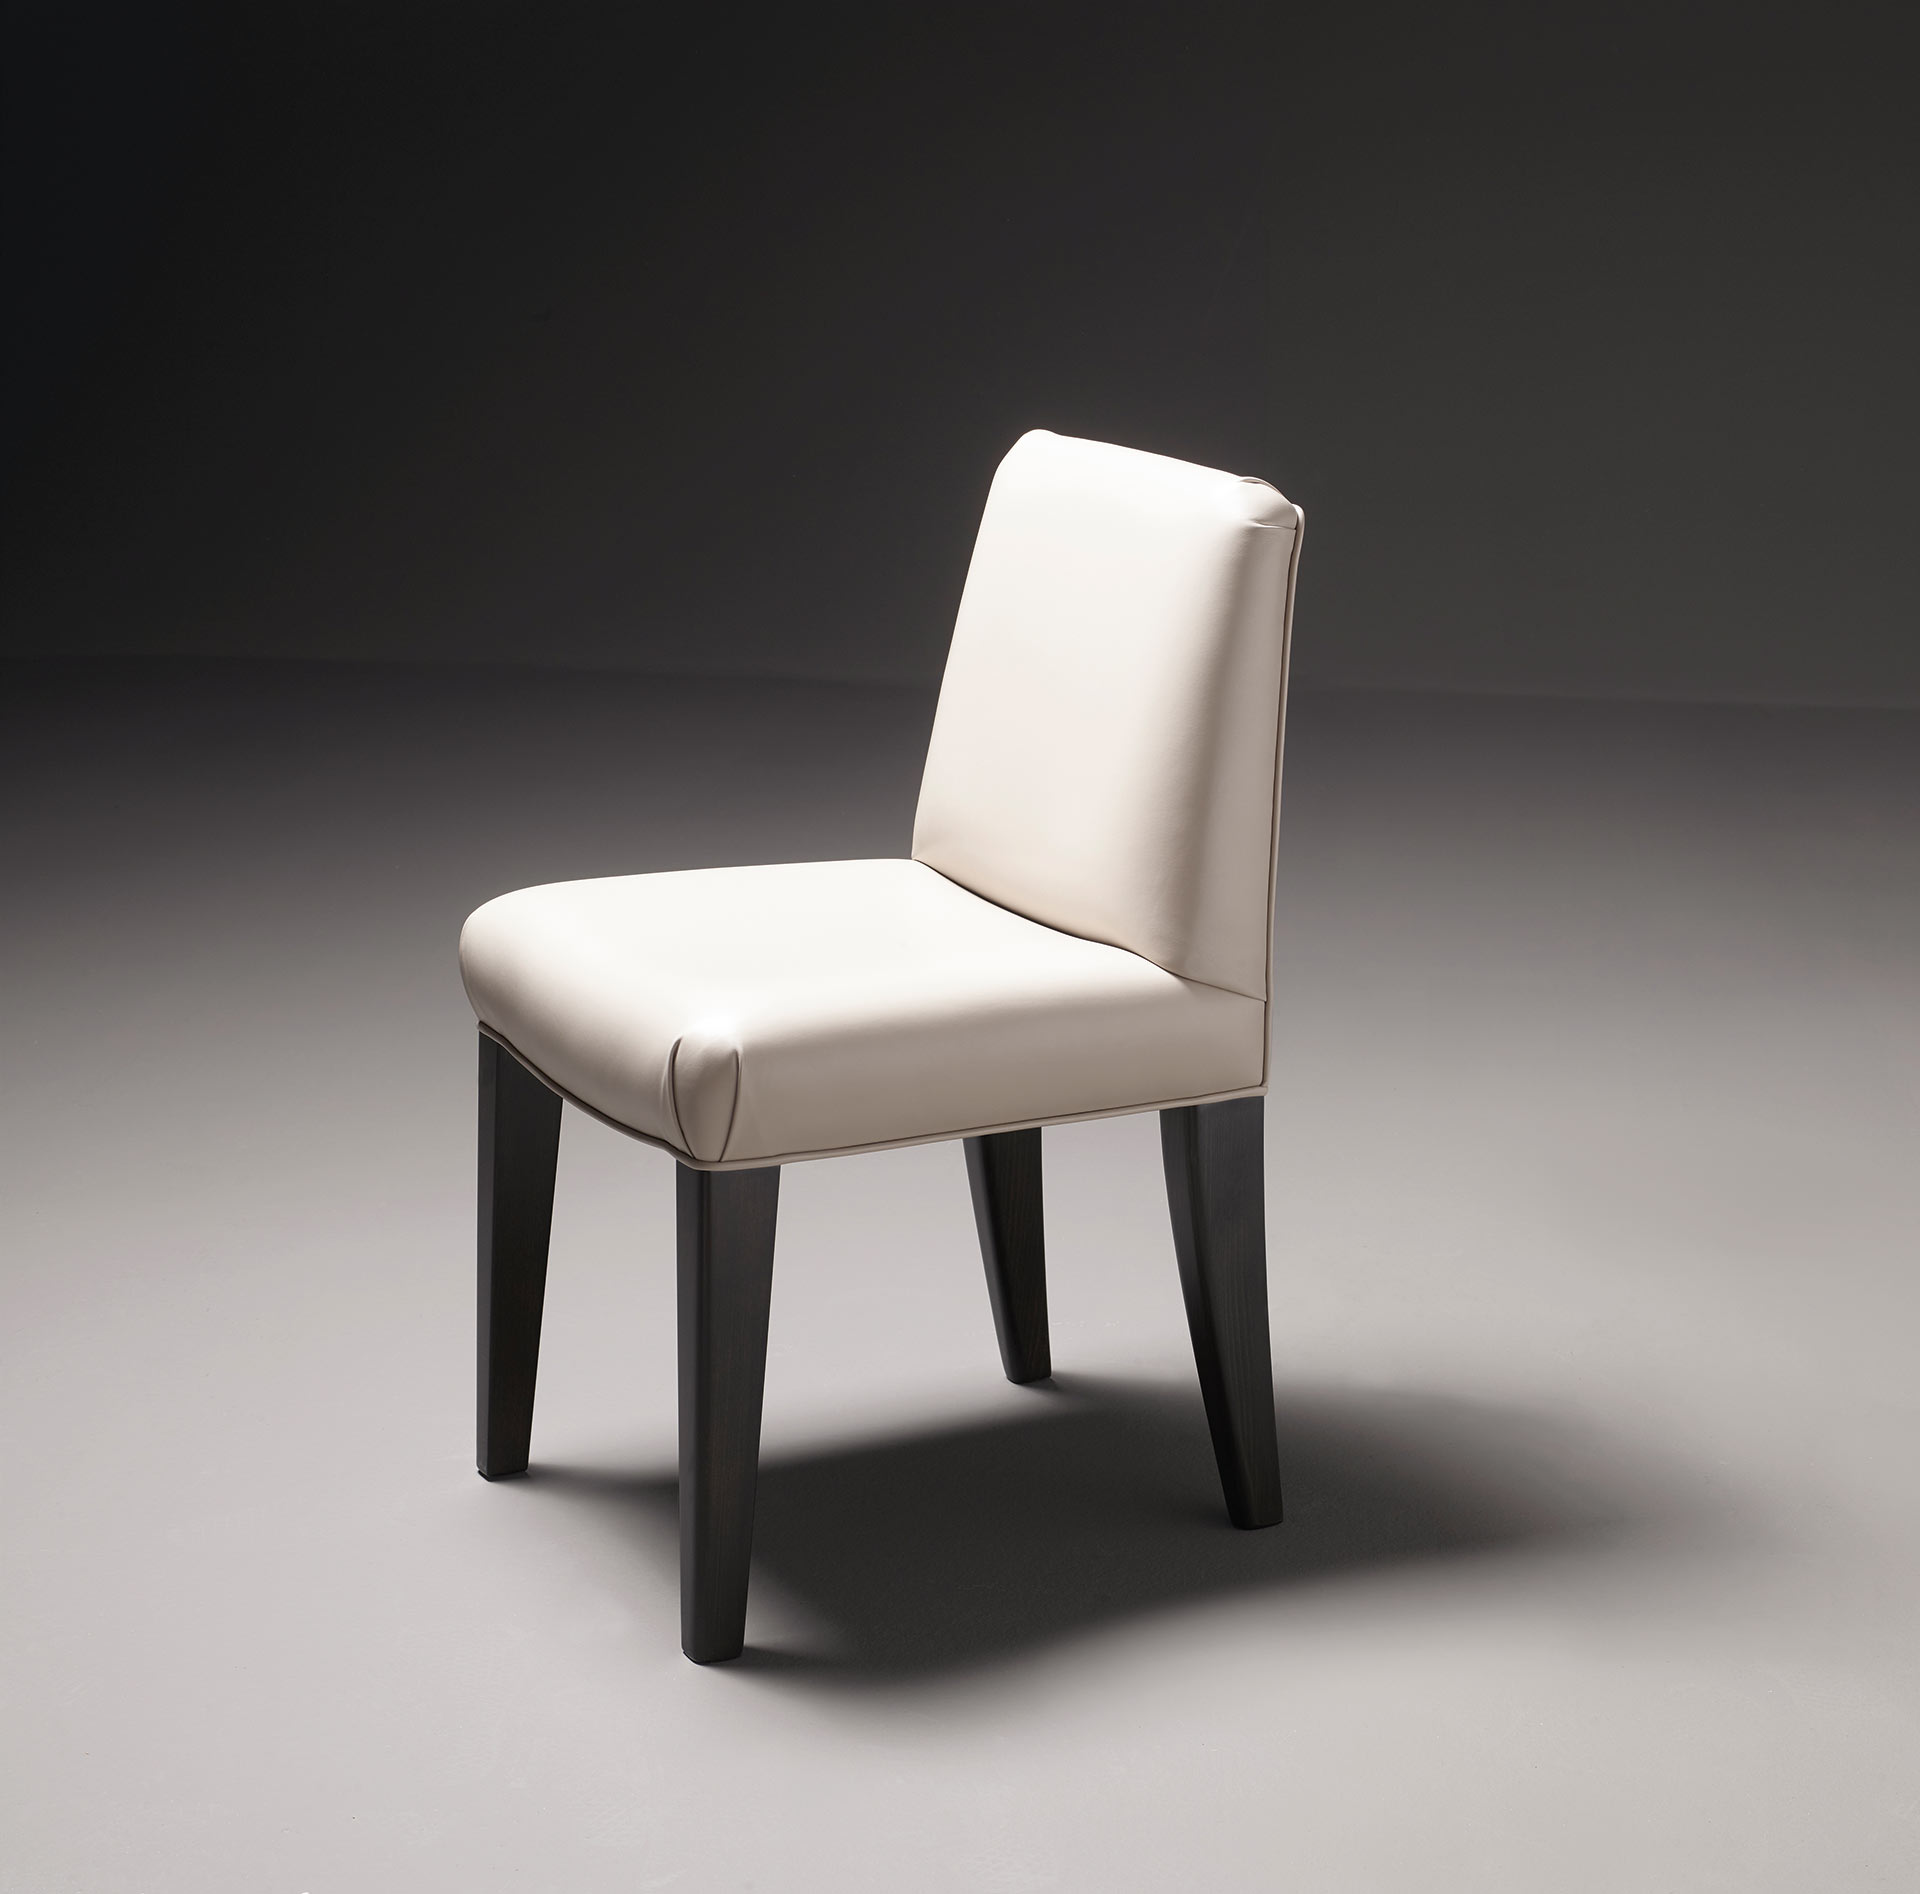 Detail of Isotta, a wooden dining chair with or without armrests and with a fabric or leather covered back, from Promemoria's catalogue | Promemoria